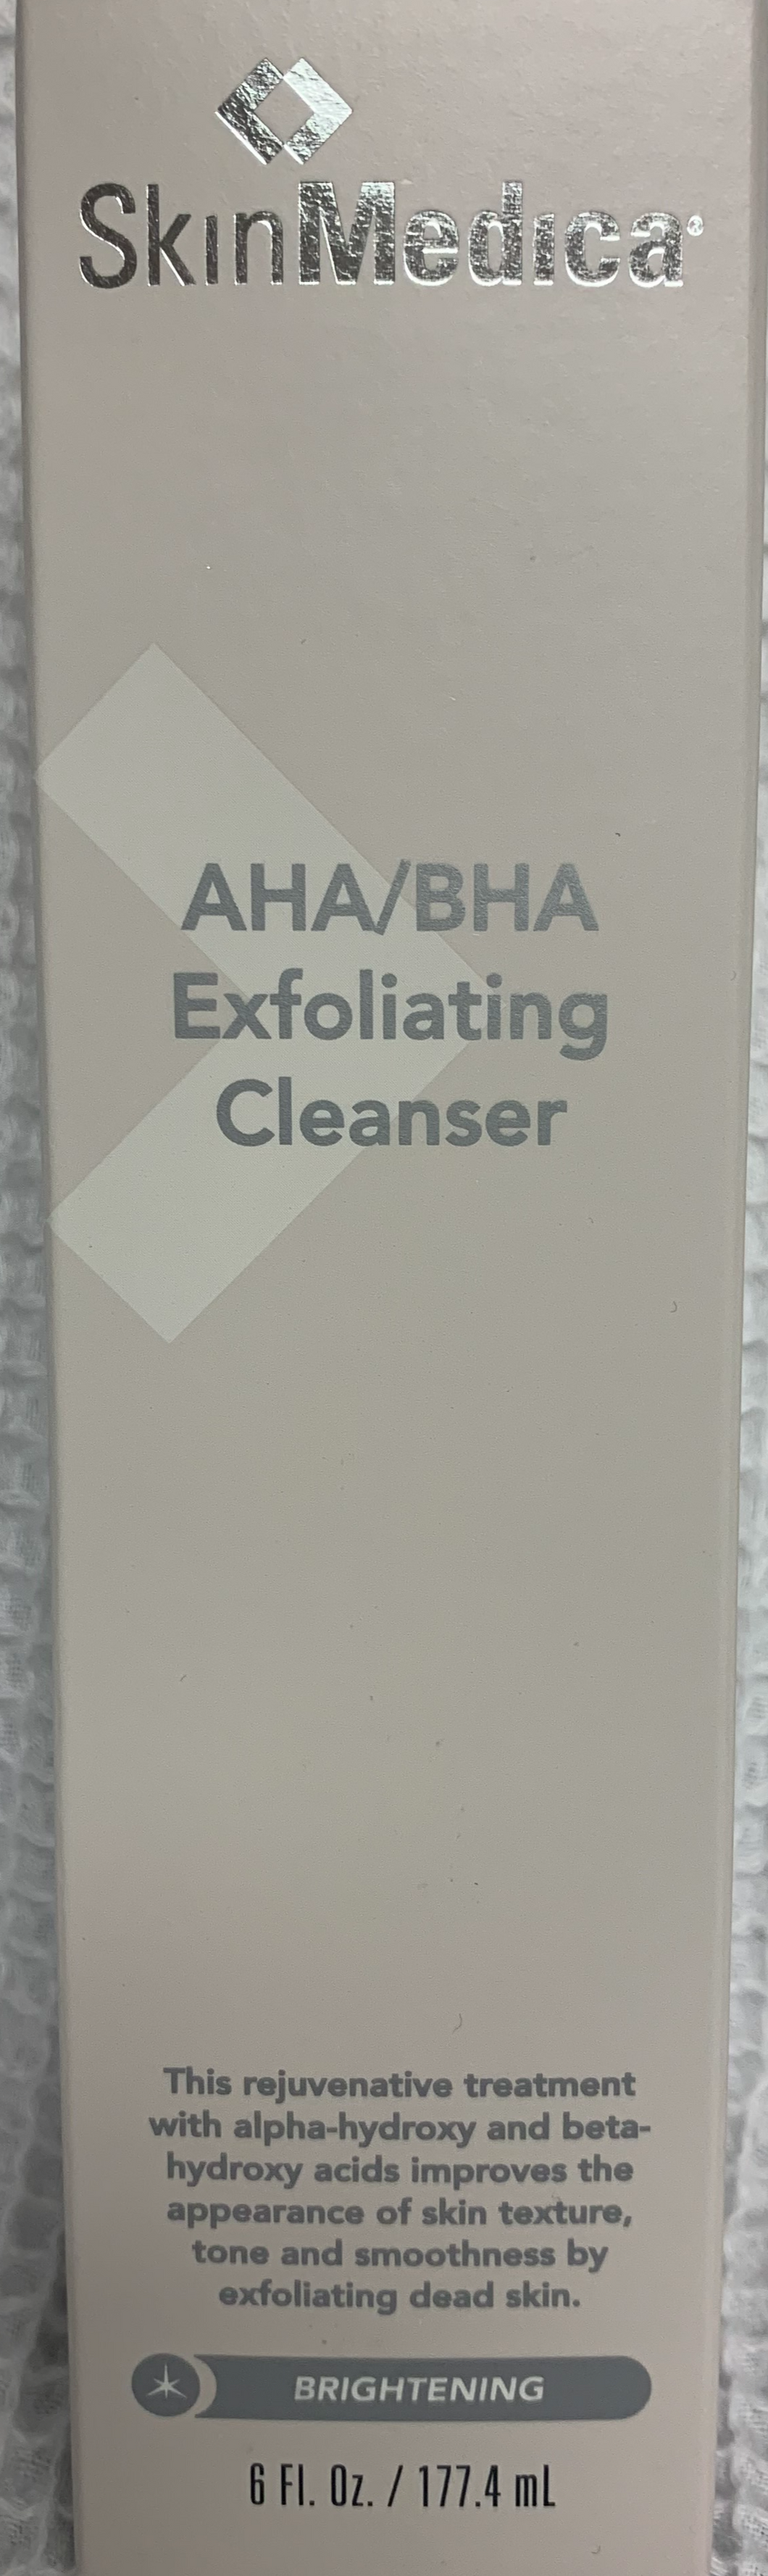 SkinMedica exfoliating cleanser gently scrubs away dead skin, improving the appearance of skin tone and texture 6 oz